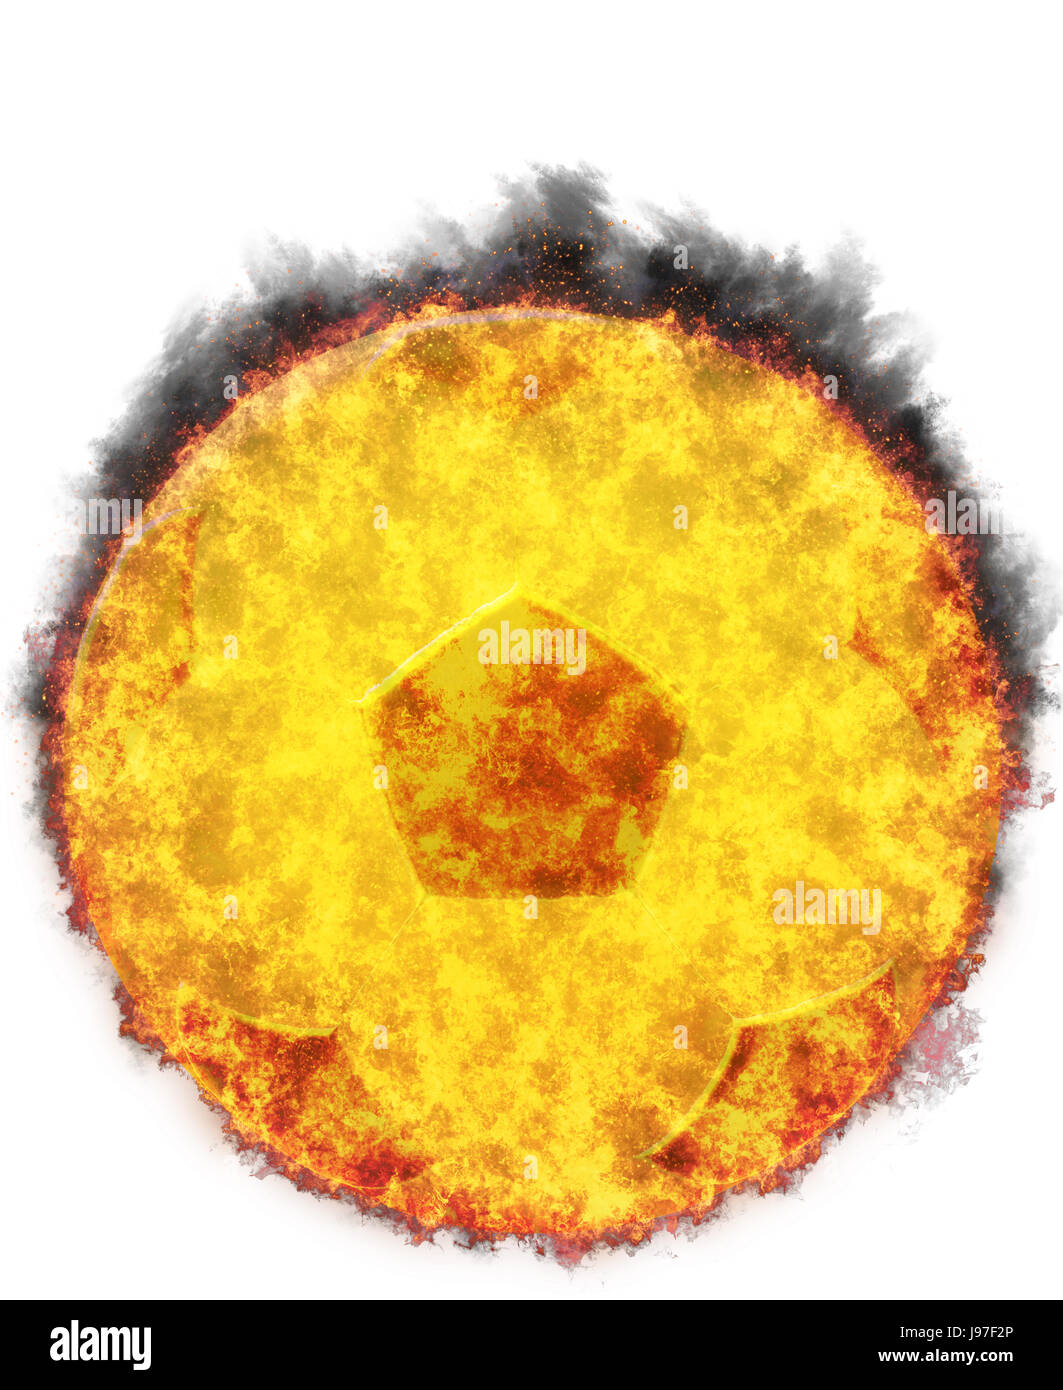 Gold Soccer Ball, bursted into flames, isolated against the white background Stock Photo